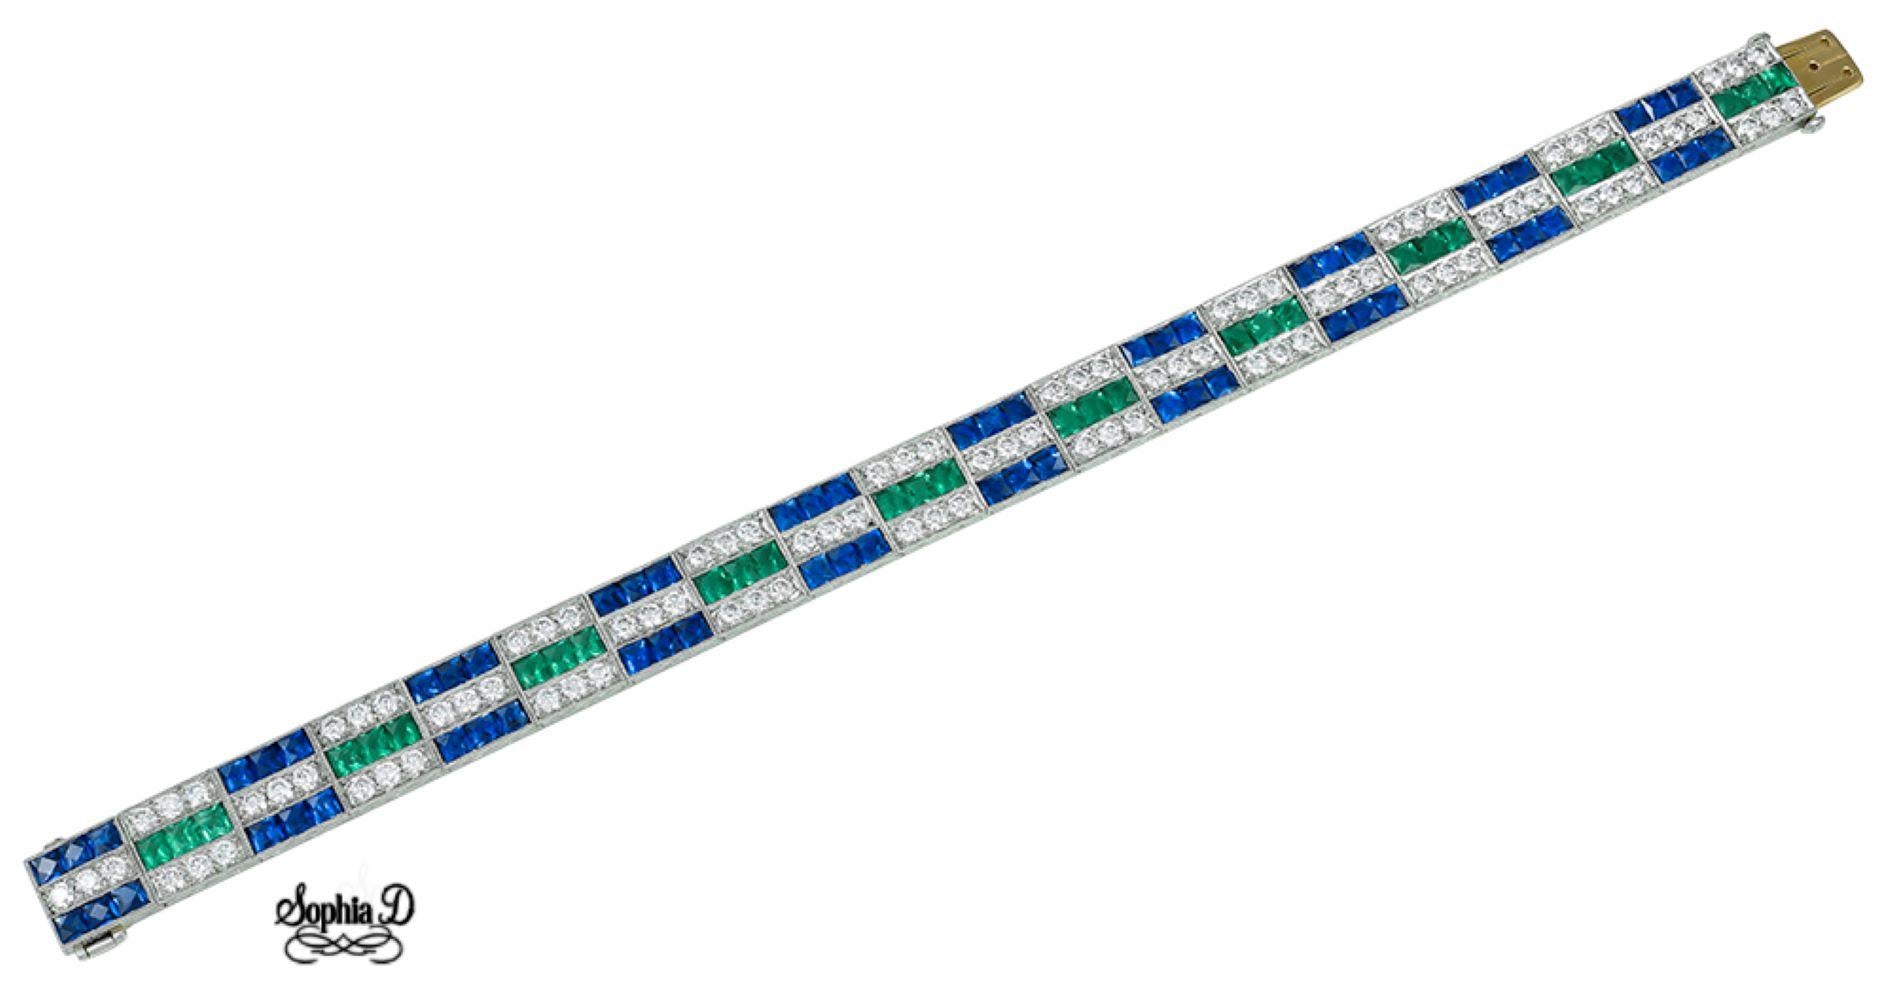 Art Deco inspired bracelet set in platinum that features a 4.16 carats of green emerald, 4.25 carats of diamond, 10.82 carats of blue sapphire.

Sophia D by Joseph Dardashti LTD has been known worldwide for 35 years and are inspired by classic Art